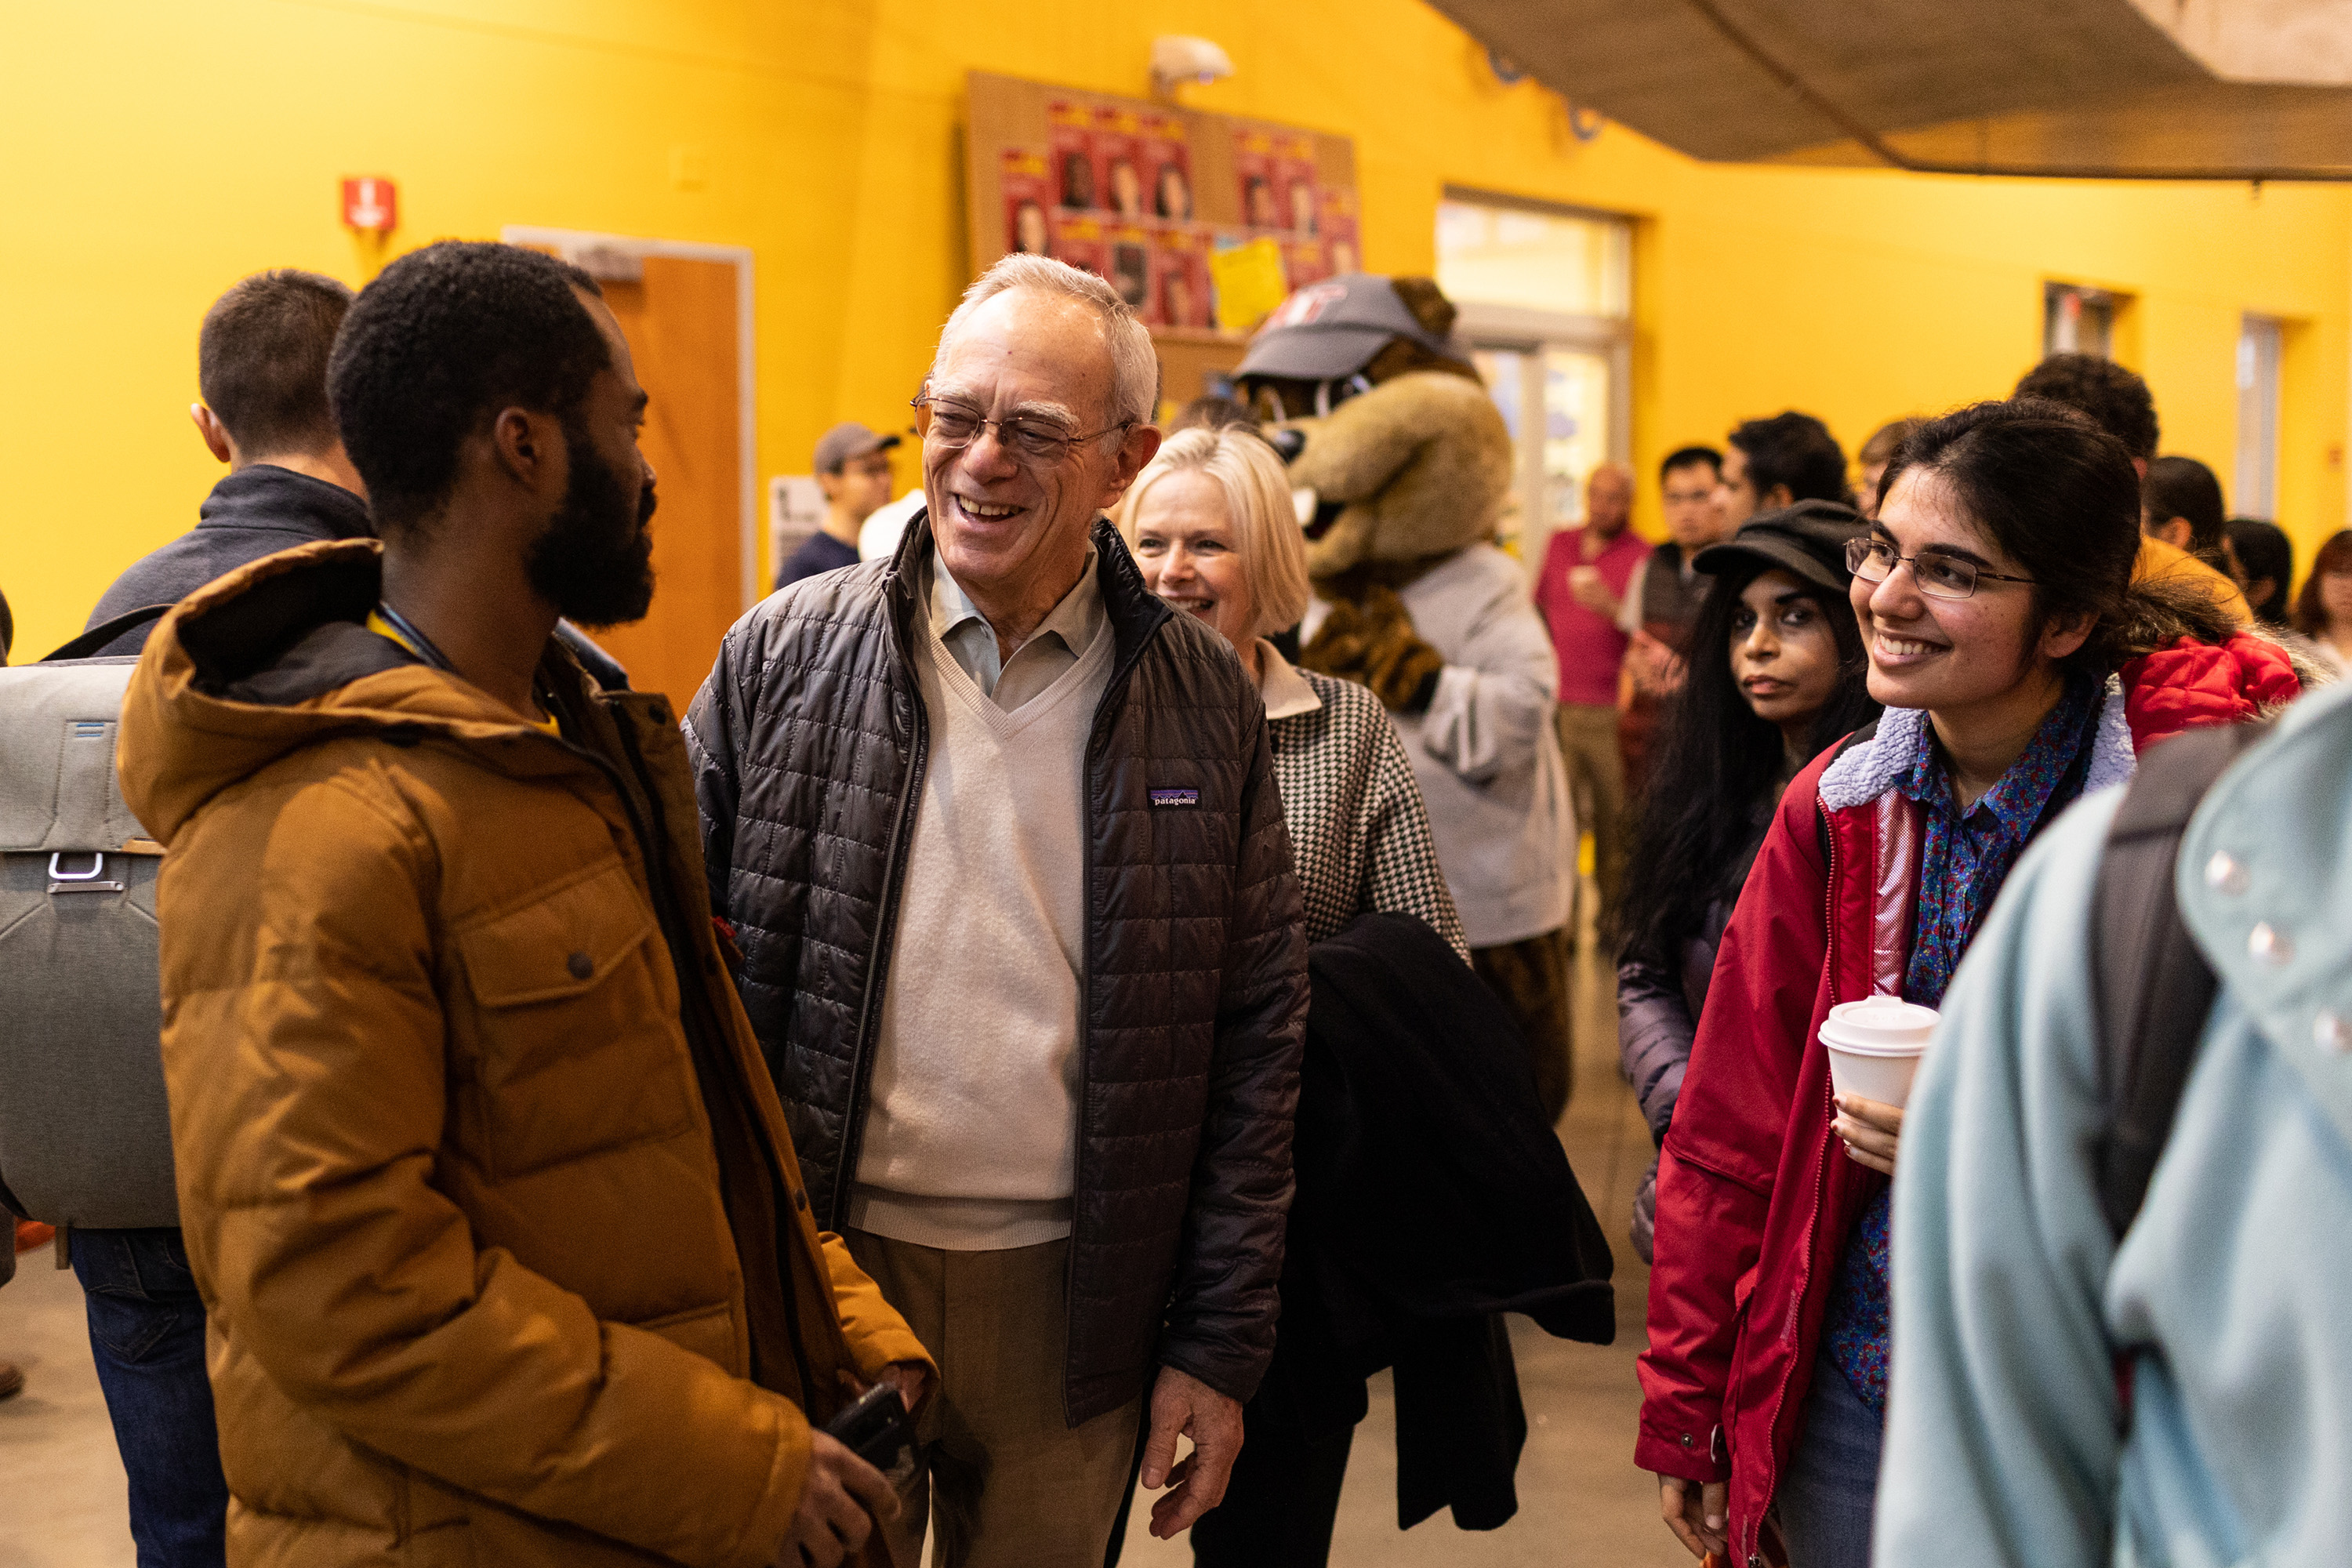 MIT President L. Rafael Reif mingled with community members at Winterfest, held in the Stata Center and the first floor of the David H. Koch Institute for Integrative Cancer Research.